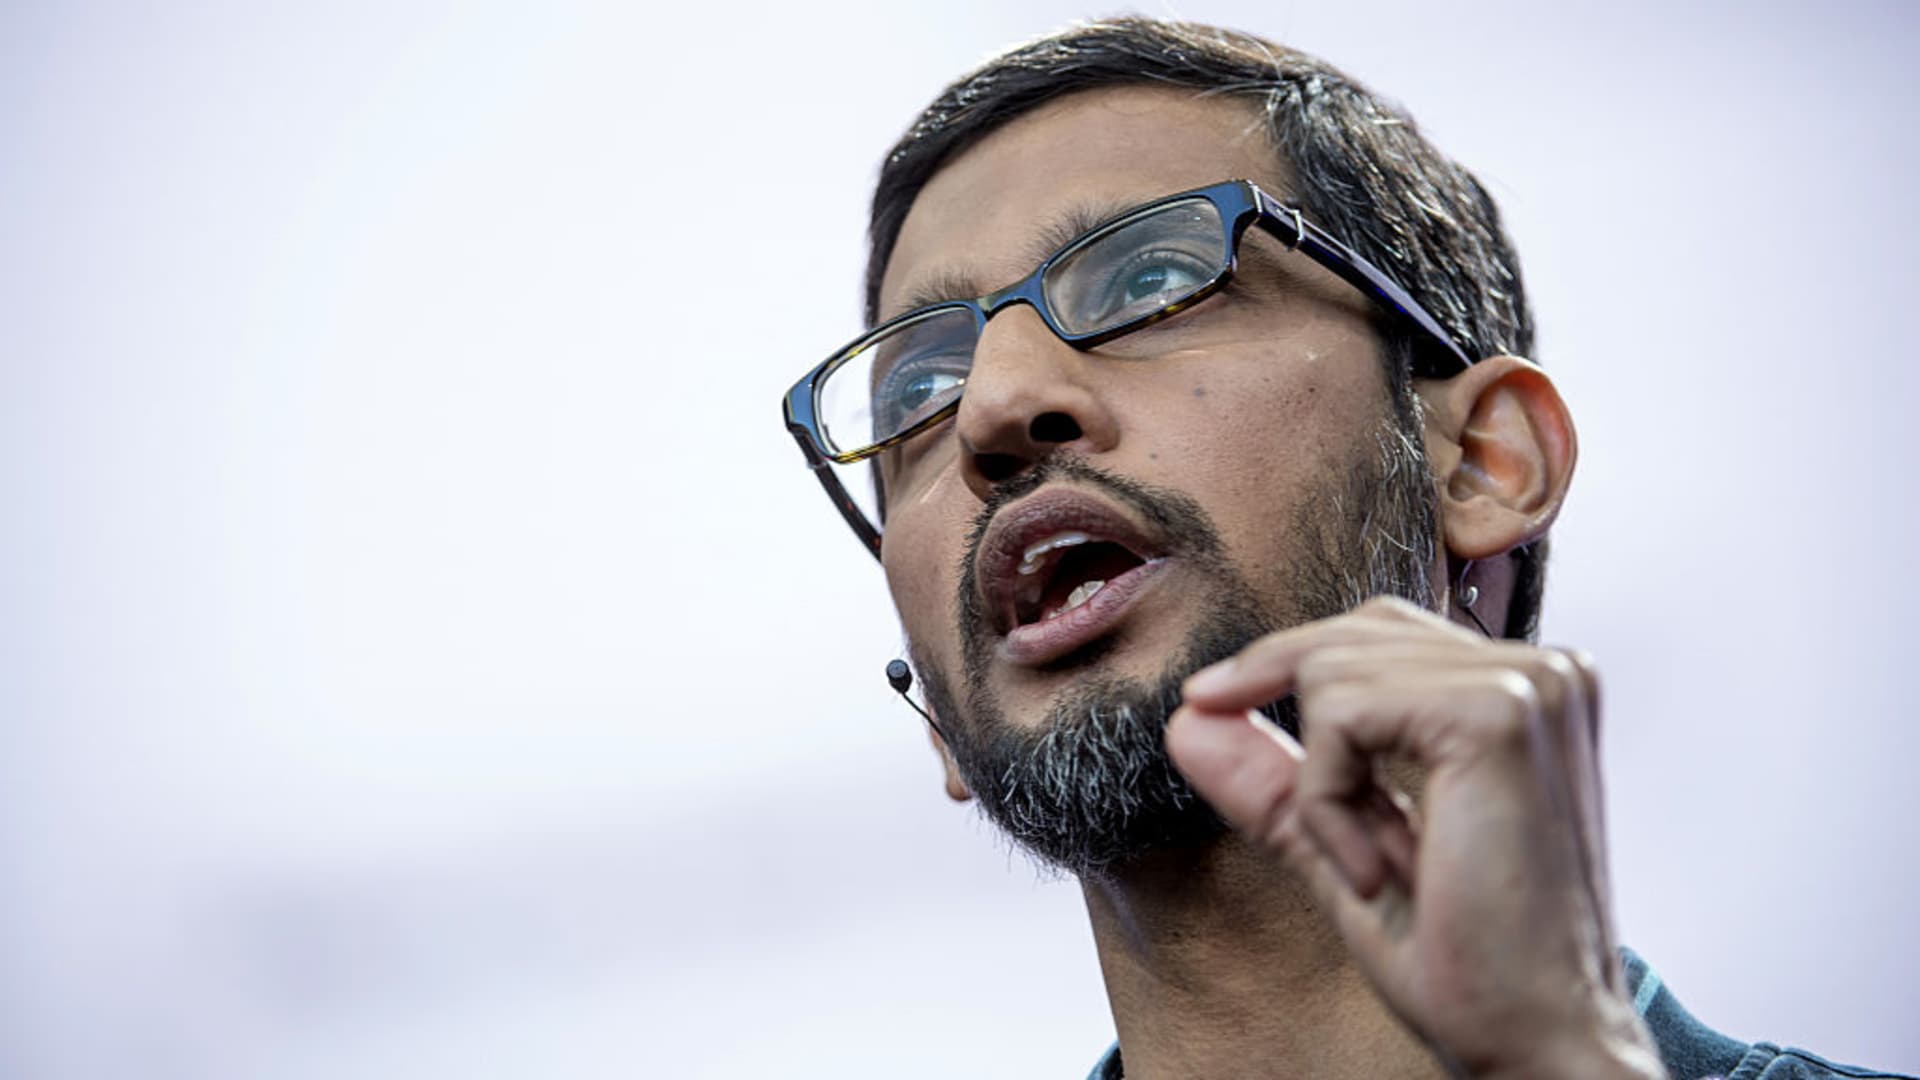 Google says it’s raising employee pay in performance review revamp